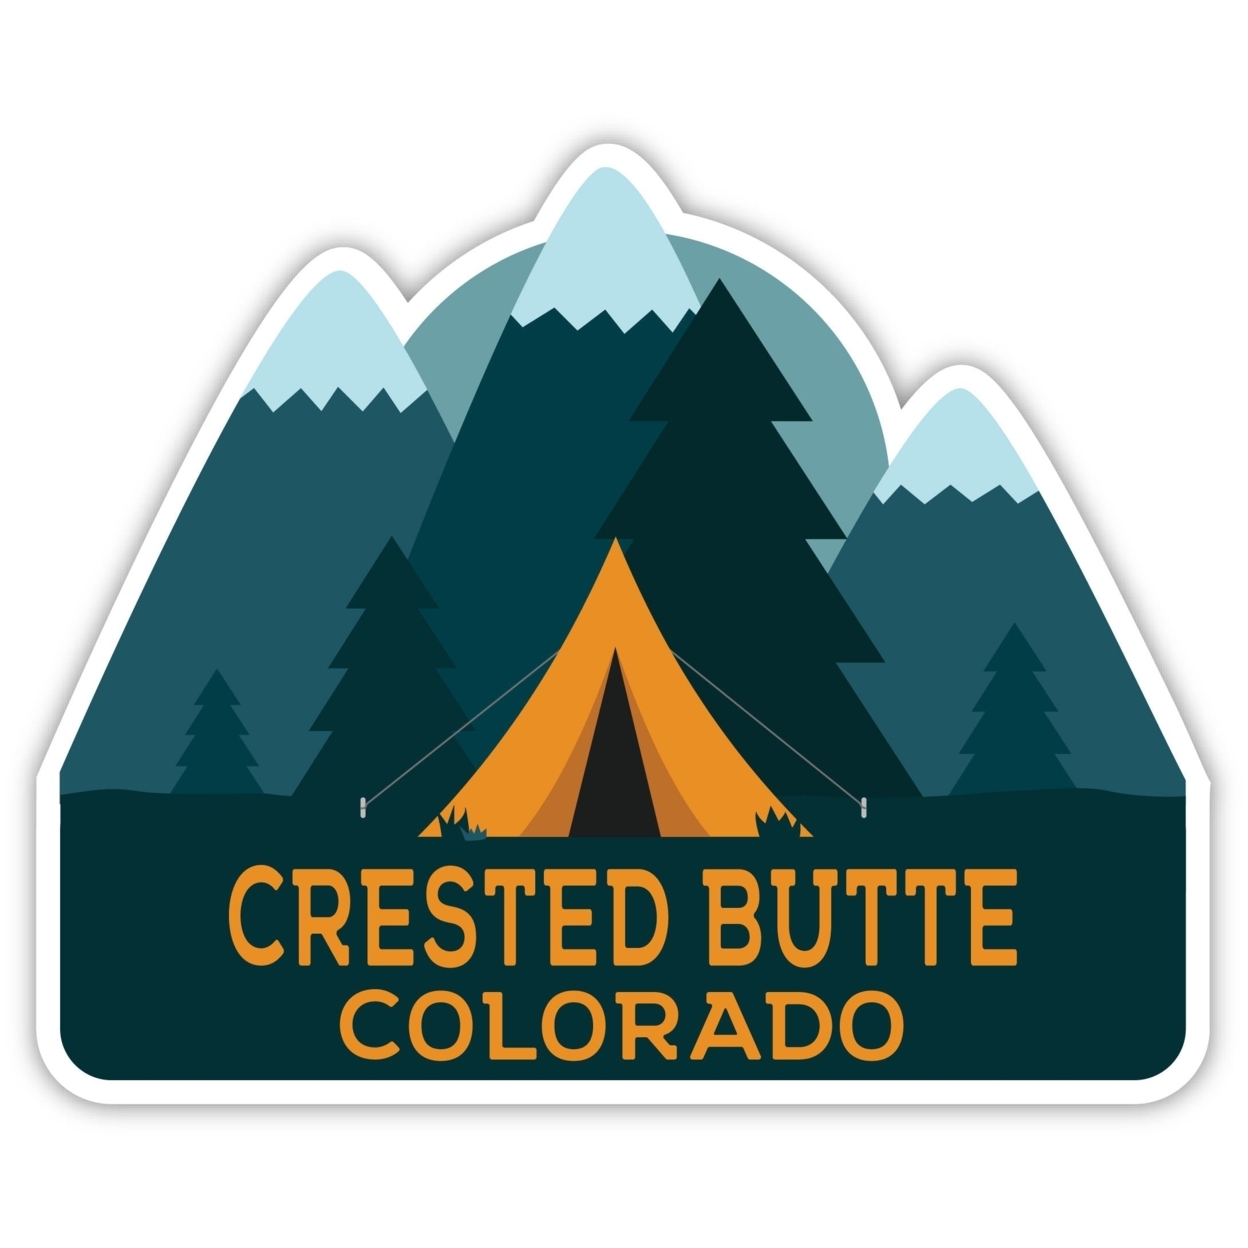 Crested Butte Colorado Souvenir Decorative Stickers (Choose Theme And Size) - 4-Pack, 6-Inch, Tent